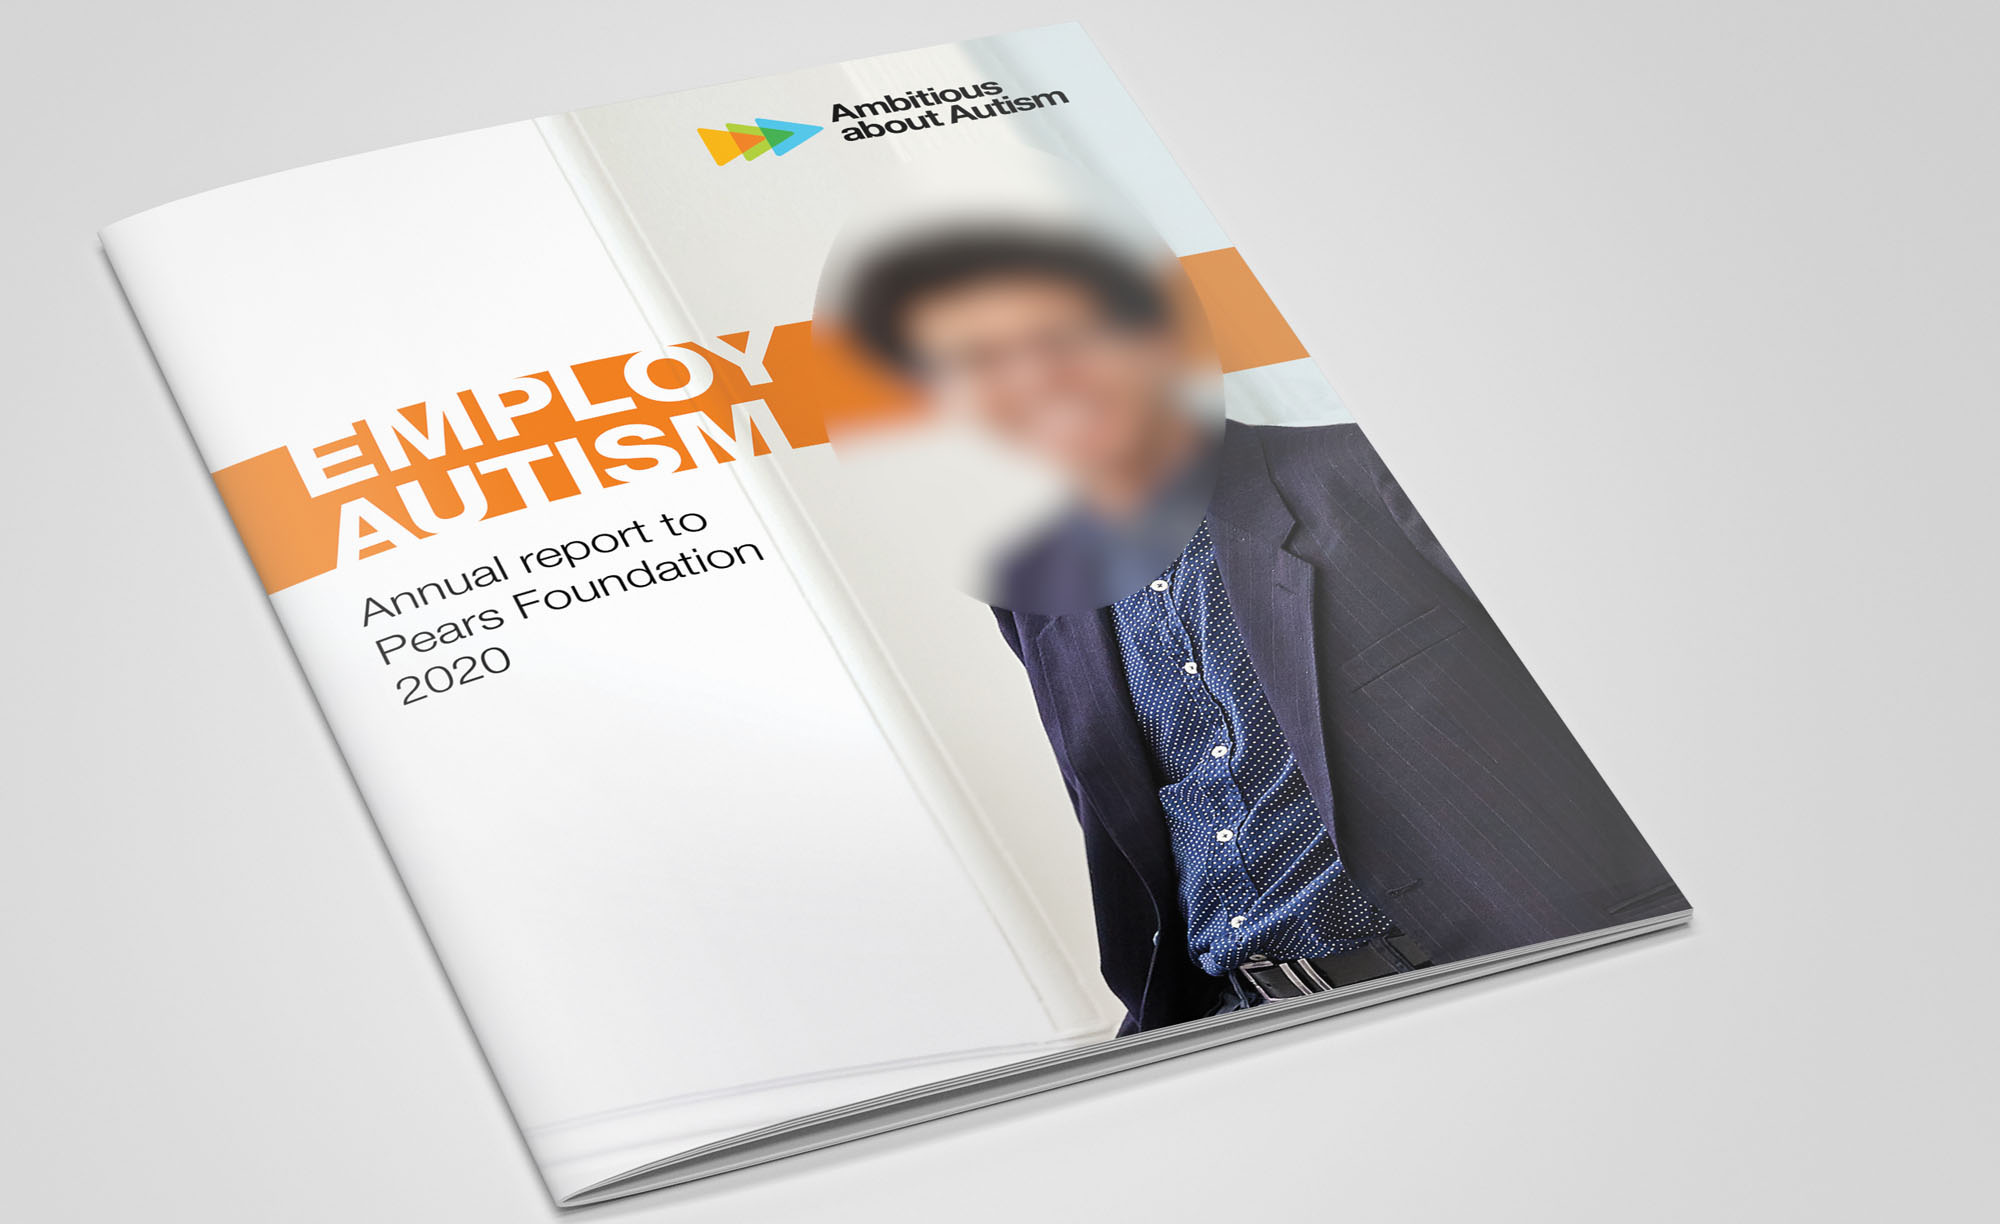 Ambitions about autism employ autism annual report